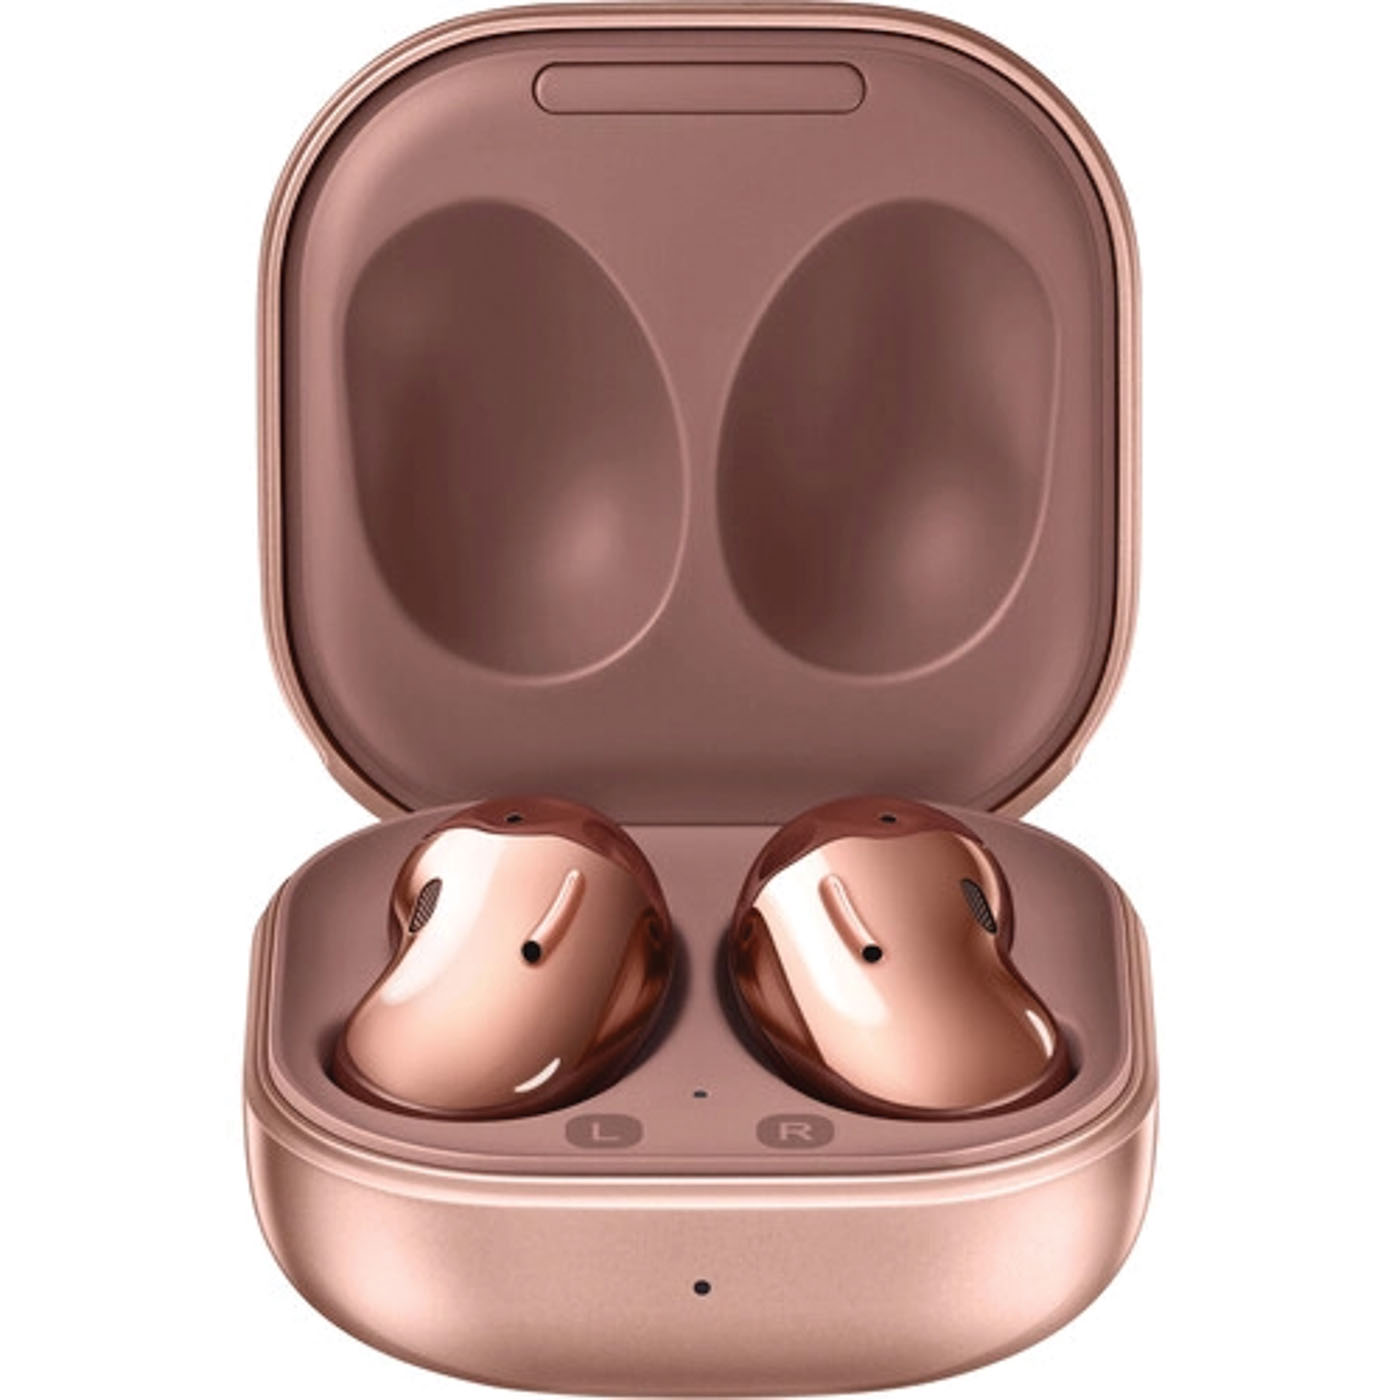 38 Samsung Galaxy Buds Live True Wireless Earbuds Us Version Active Noise Cancelling Wireless Charging Case Included, Mystic Bronze $150 Amazon.com